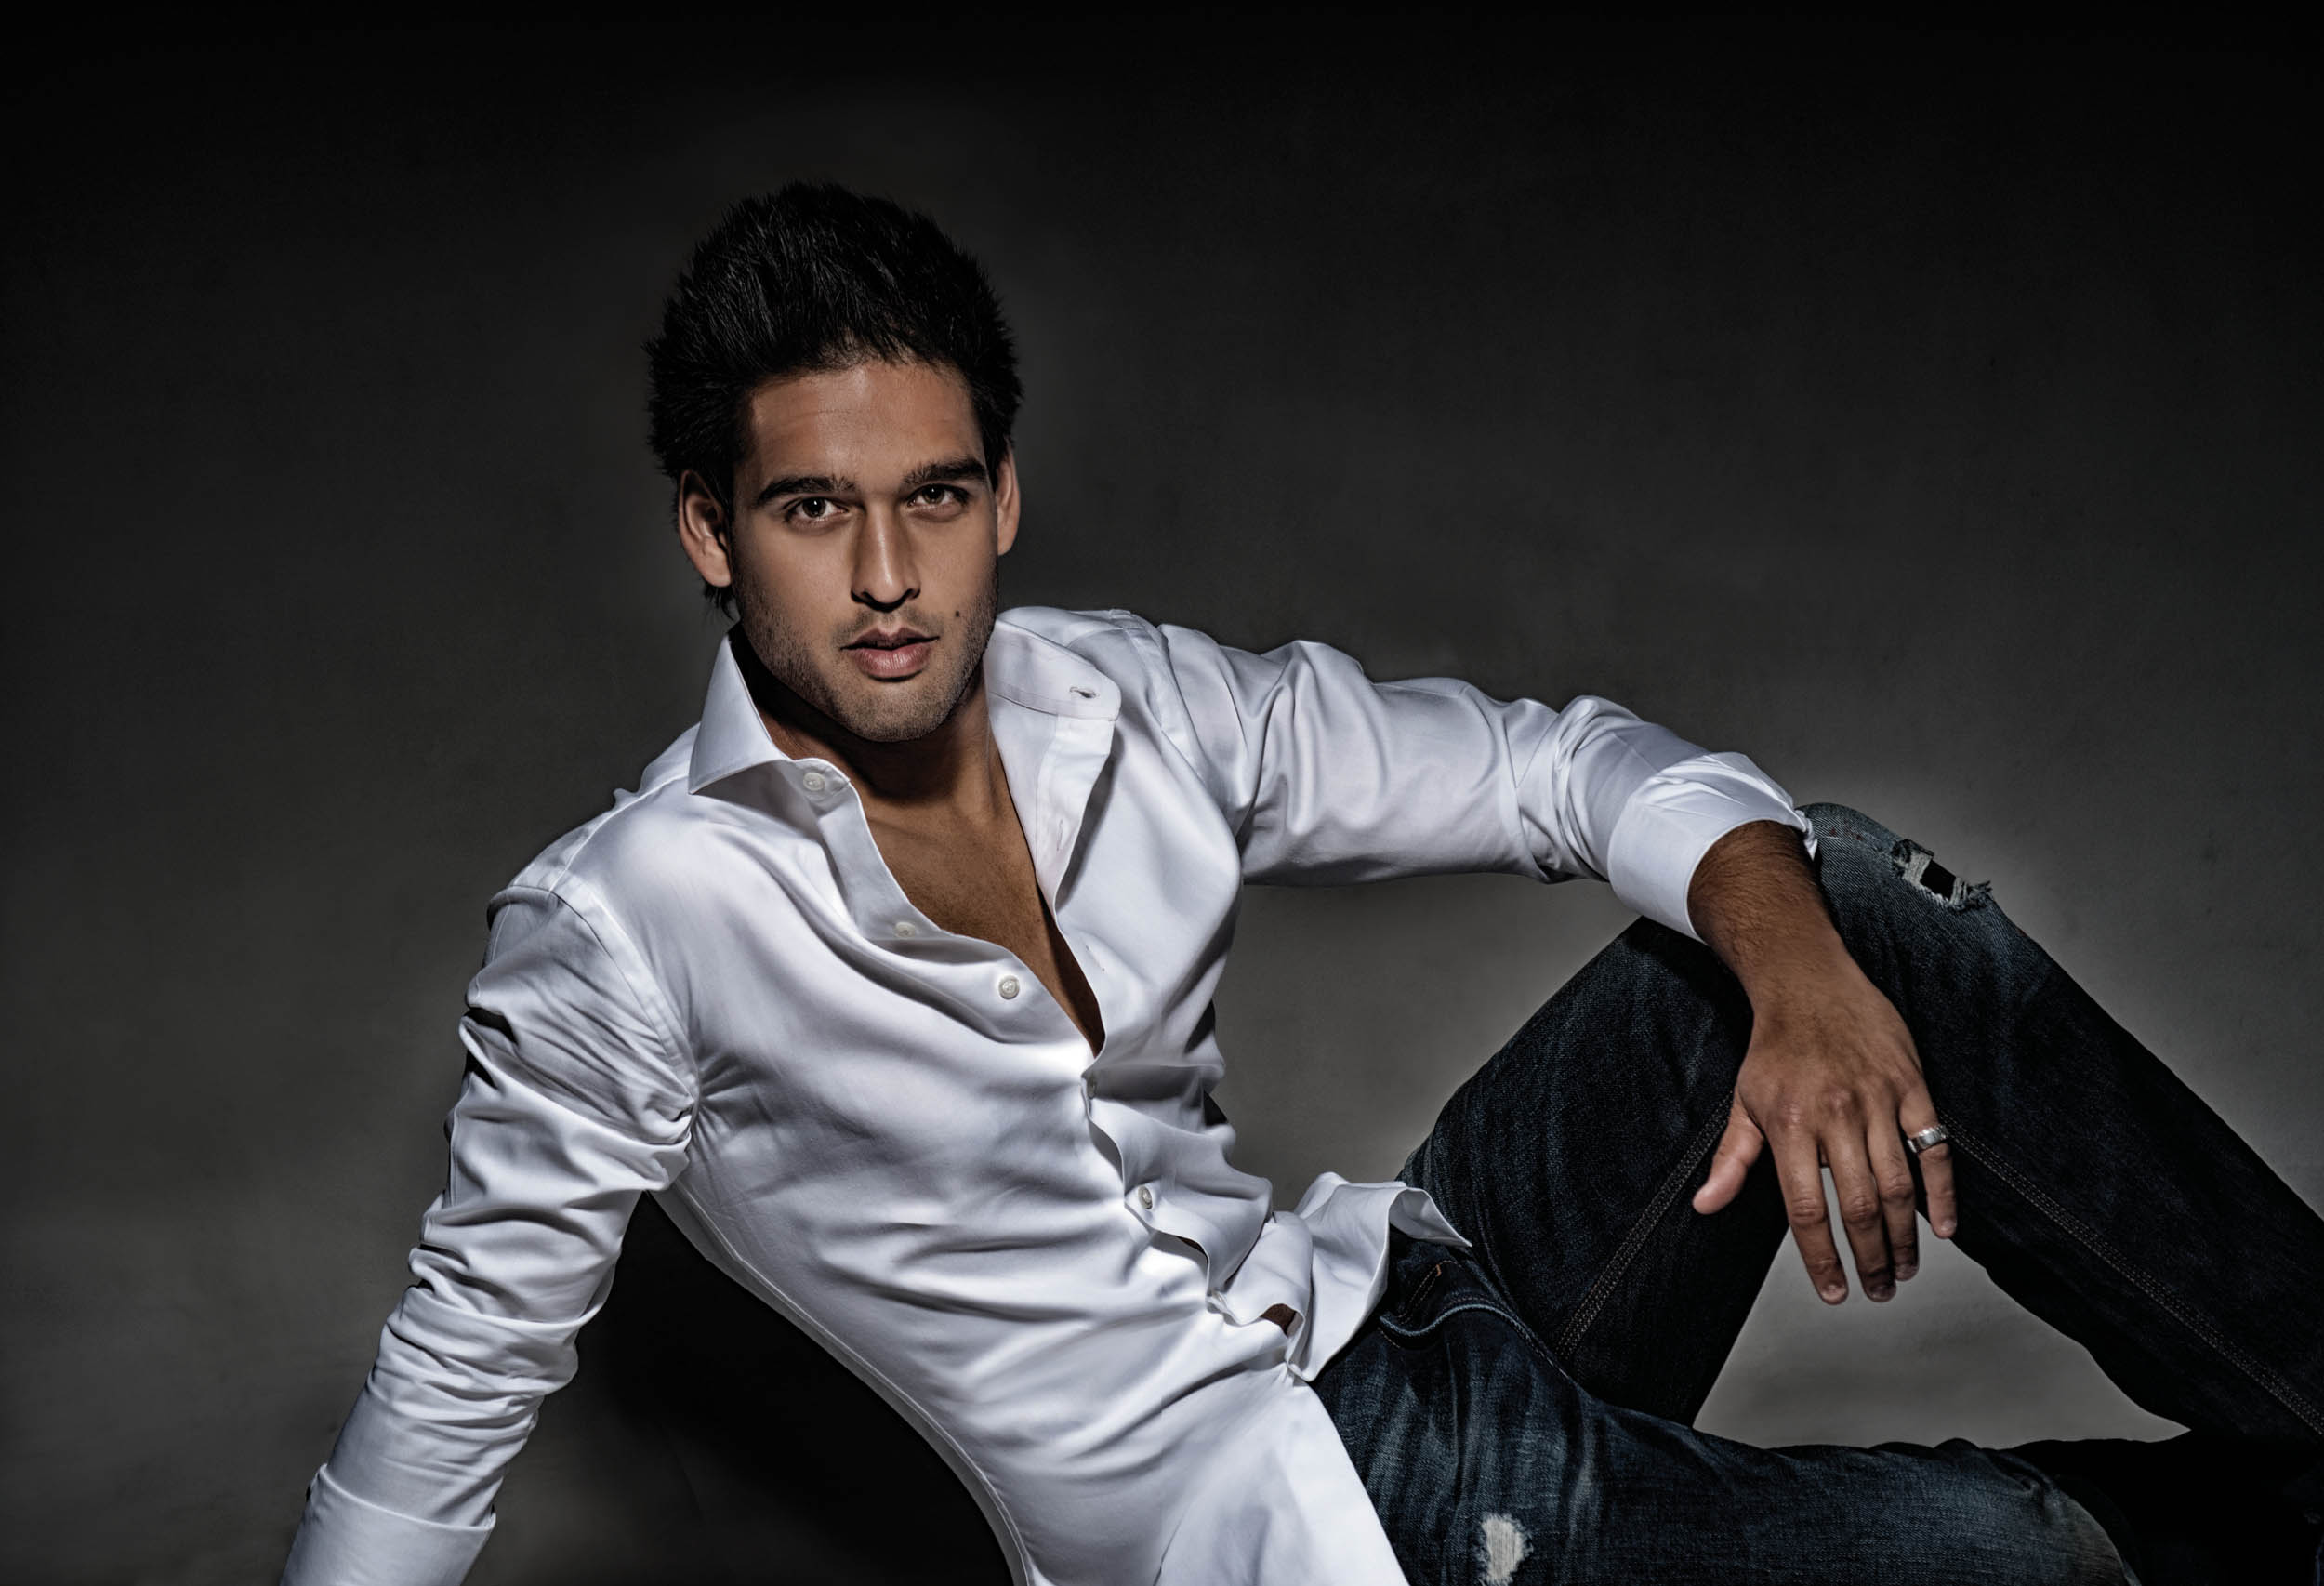 Best Celebritiy Photographer in India Vikram Bawa, Indian - American Actor & Model Siddharth Mallya for Hello!, Shooting with Celebrity, Magazine shoot, Model, Best Portrait Photographer, Best Published Photographer, Best Editorial Photographer, Best Fashion Photographer Vikram Bawa in Mumbai, India